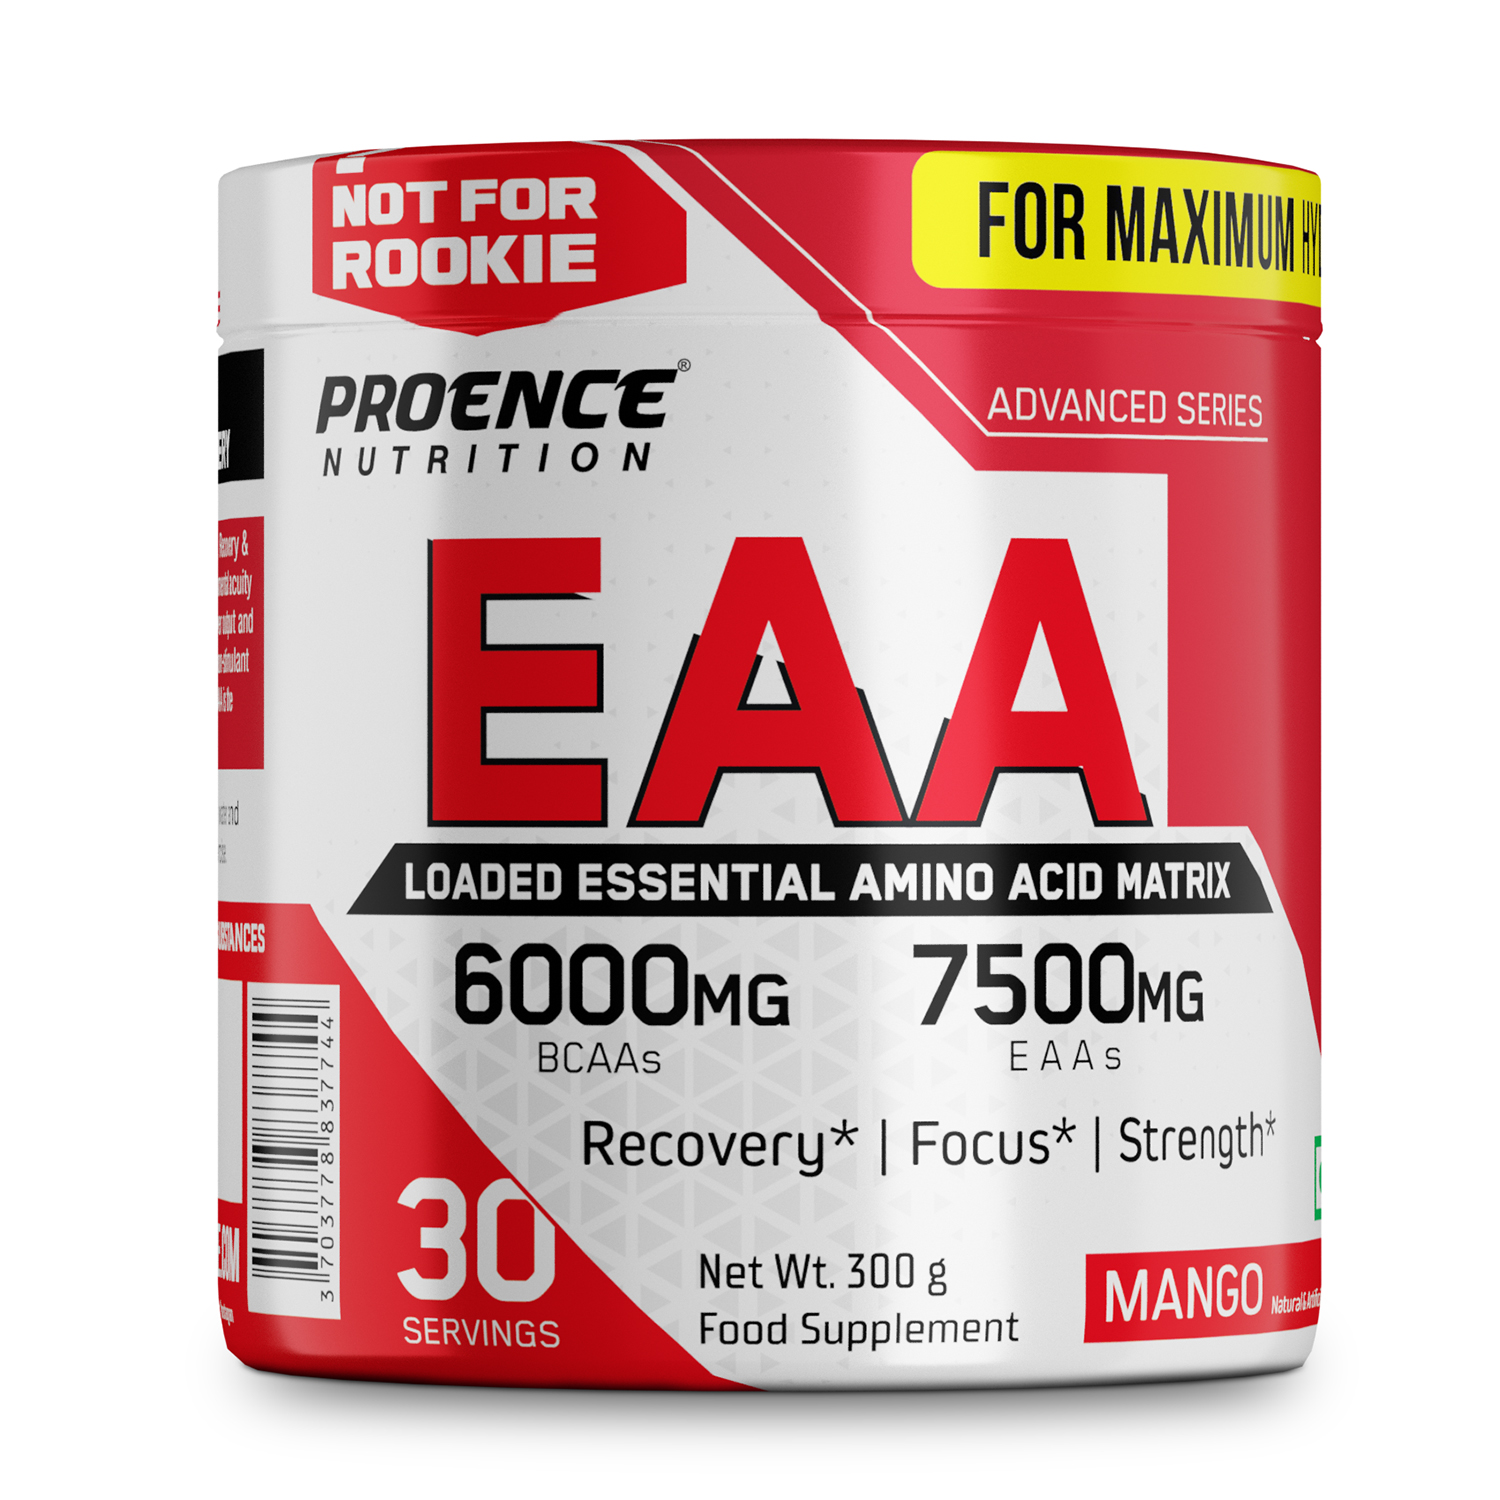 Proence EAA (Essential Amino Acids) BCAA for Intra-Workout/Post Workout,  300grams - EAA Supplements - Workout Essentials - Sports Nutrition